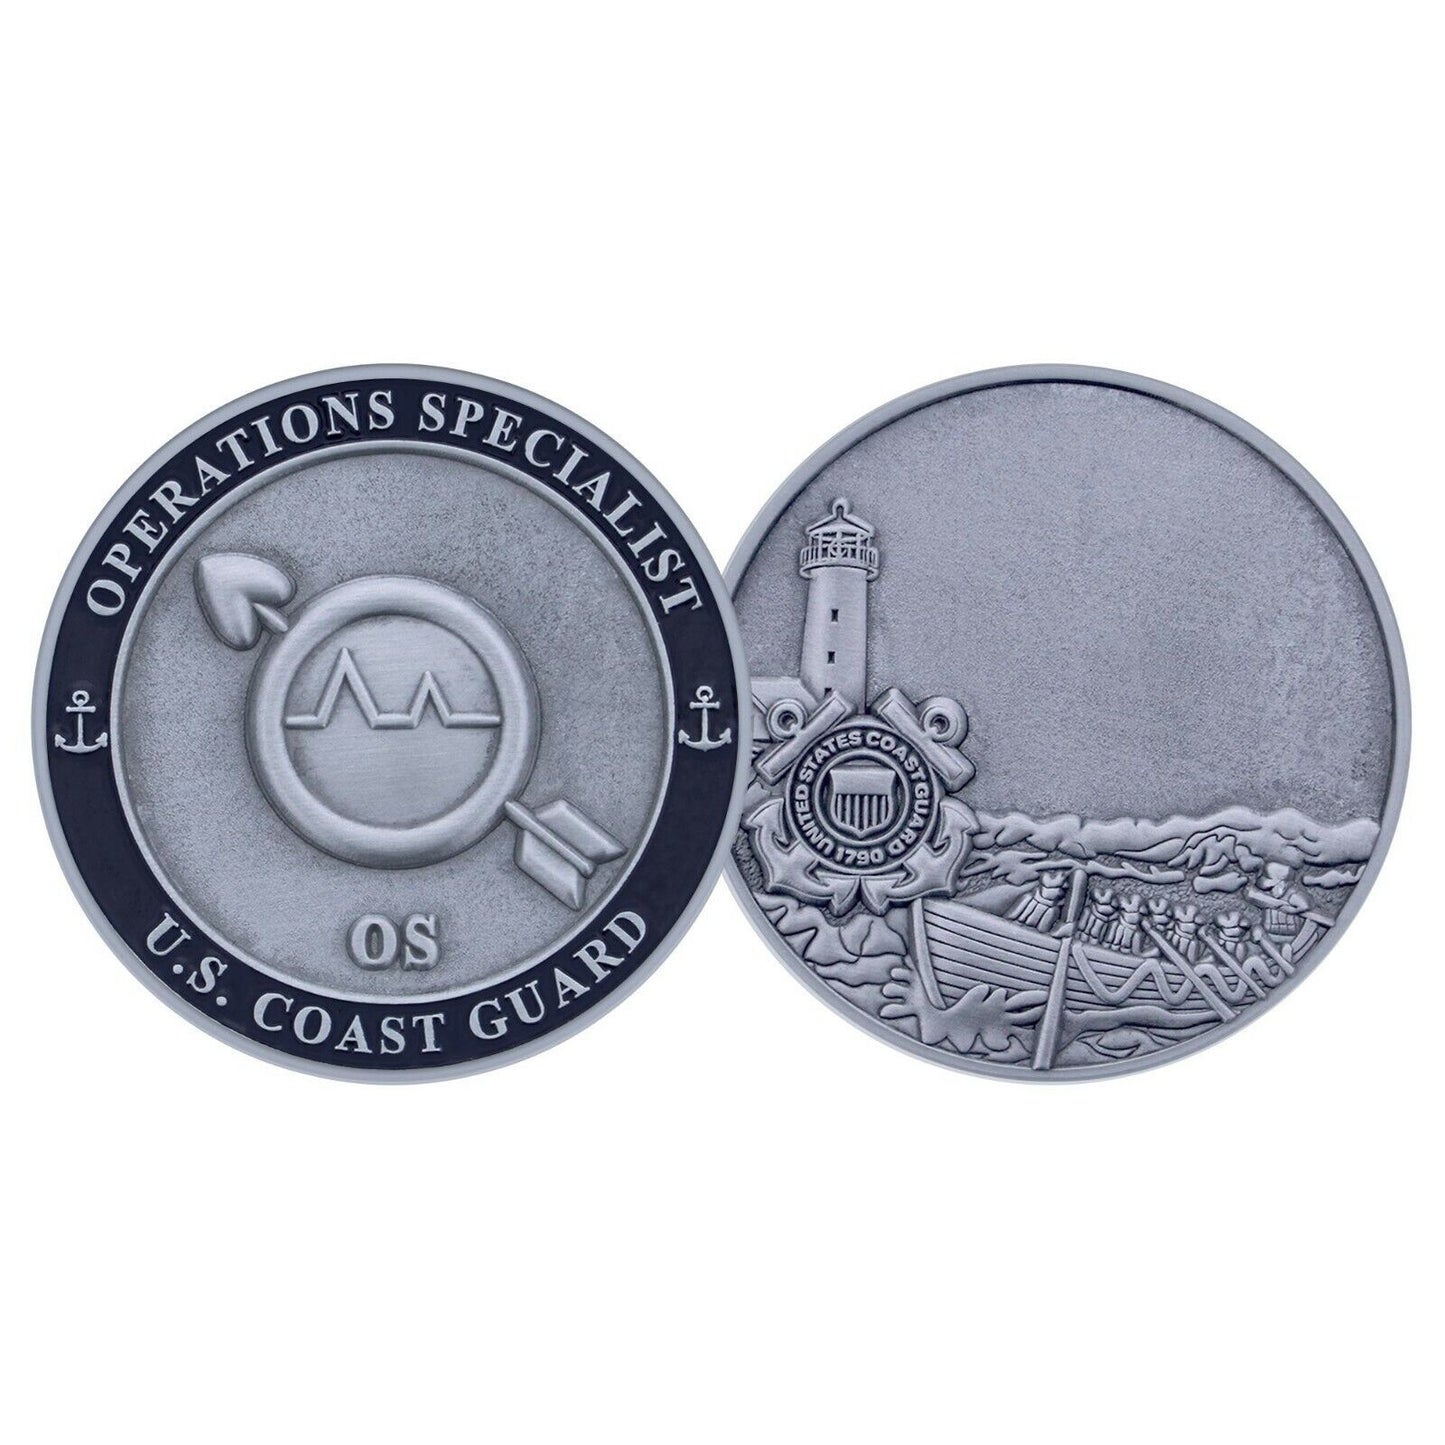 USCG Operations Specialist Challenge Coin